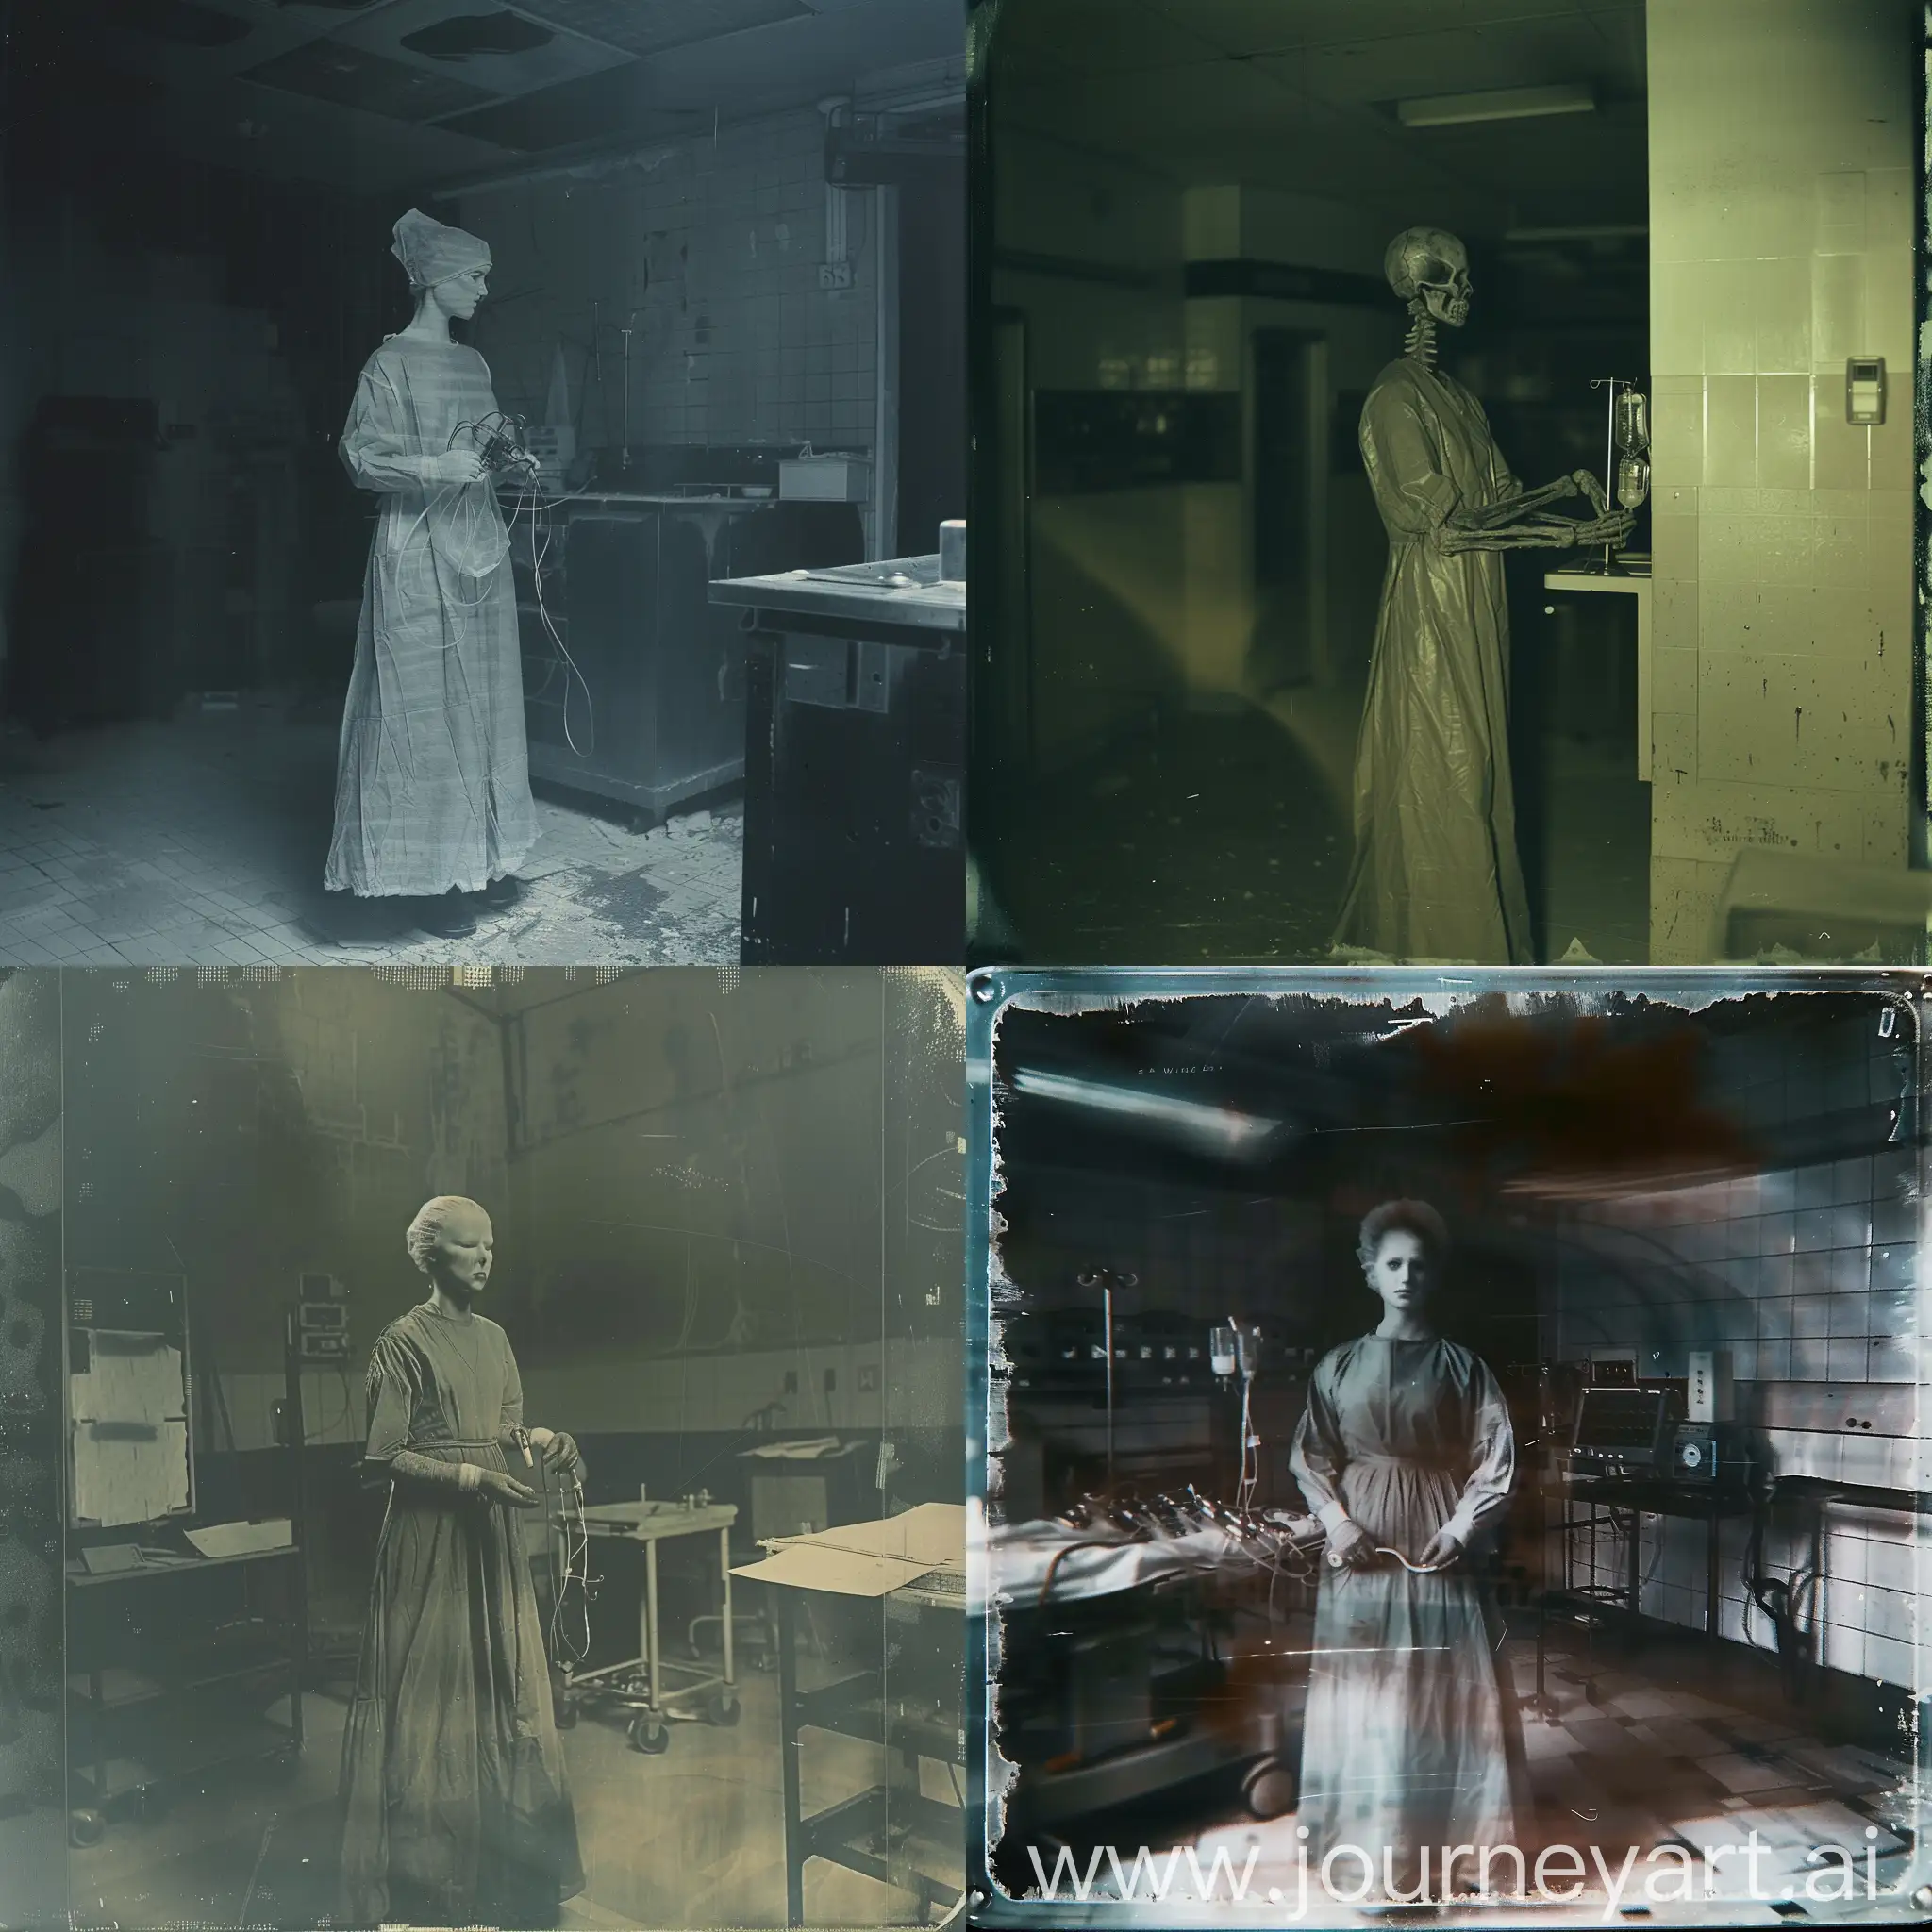 Grainy disposable photo view of a back view of a ghostly pale nurse wearing long uniform holding a surgery equipment in an abandoned dark surgery room that no longer functioning, haunting and eerie atmosphere. Shot far focus on her.